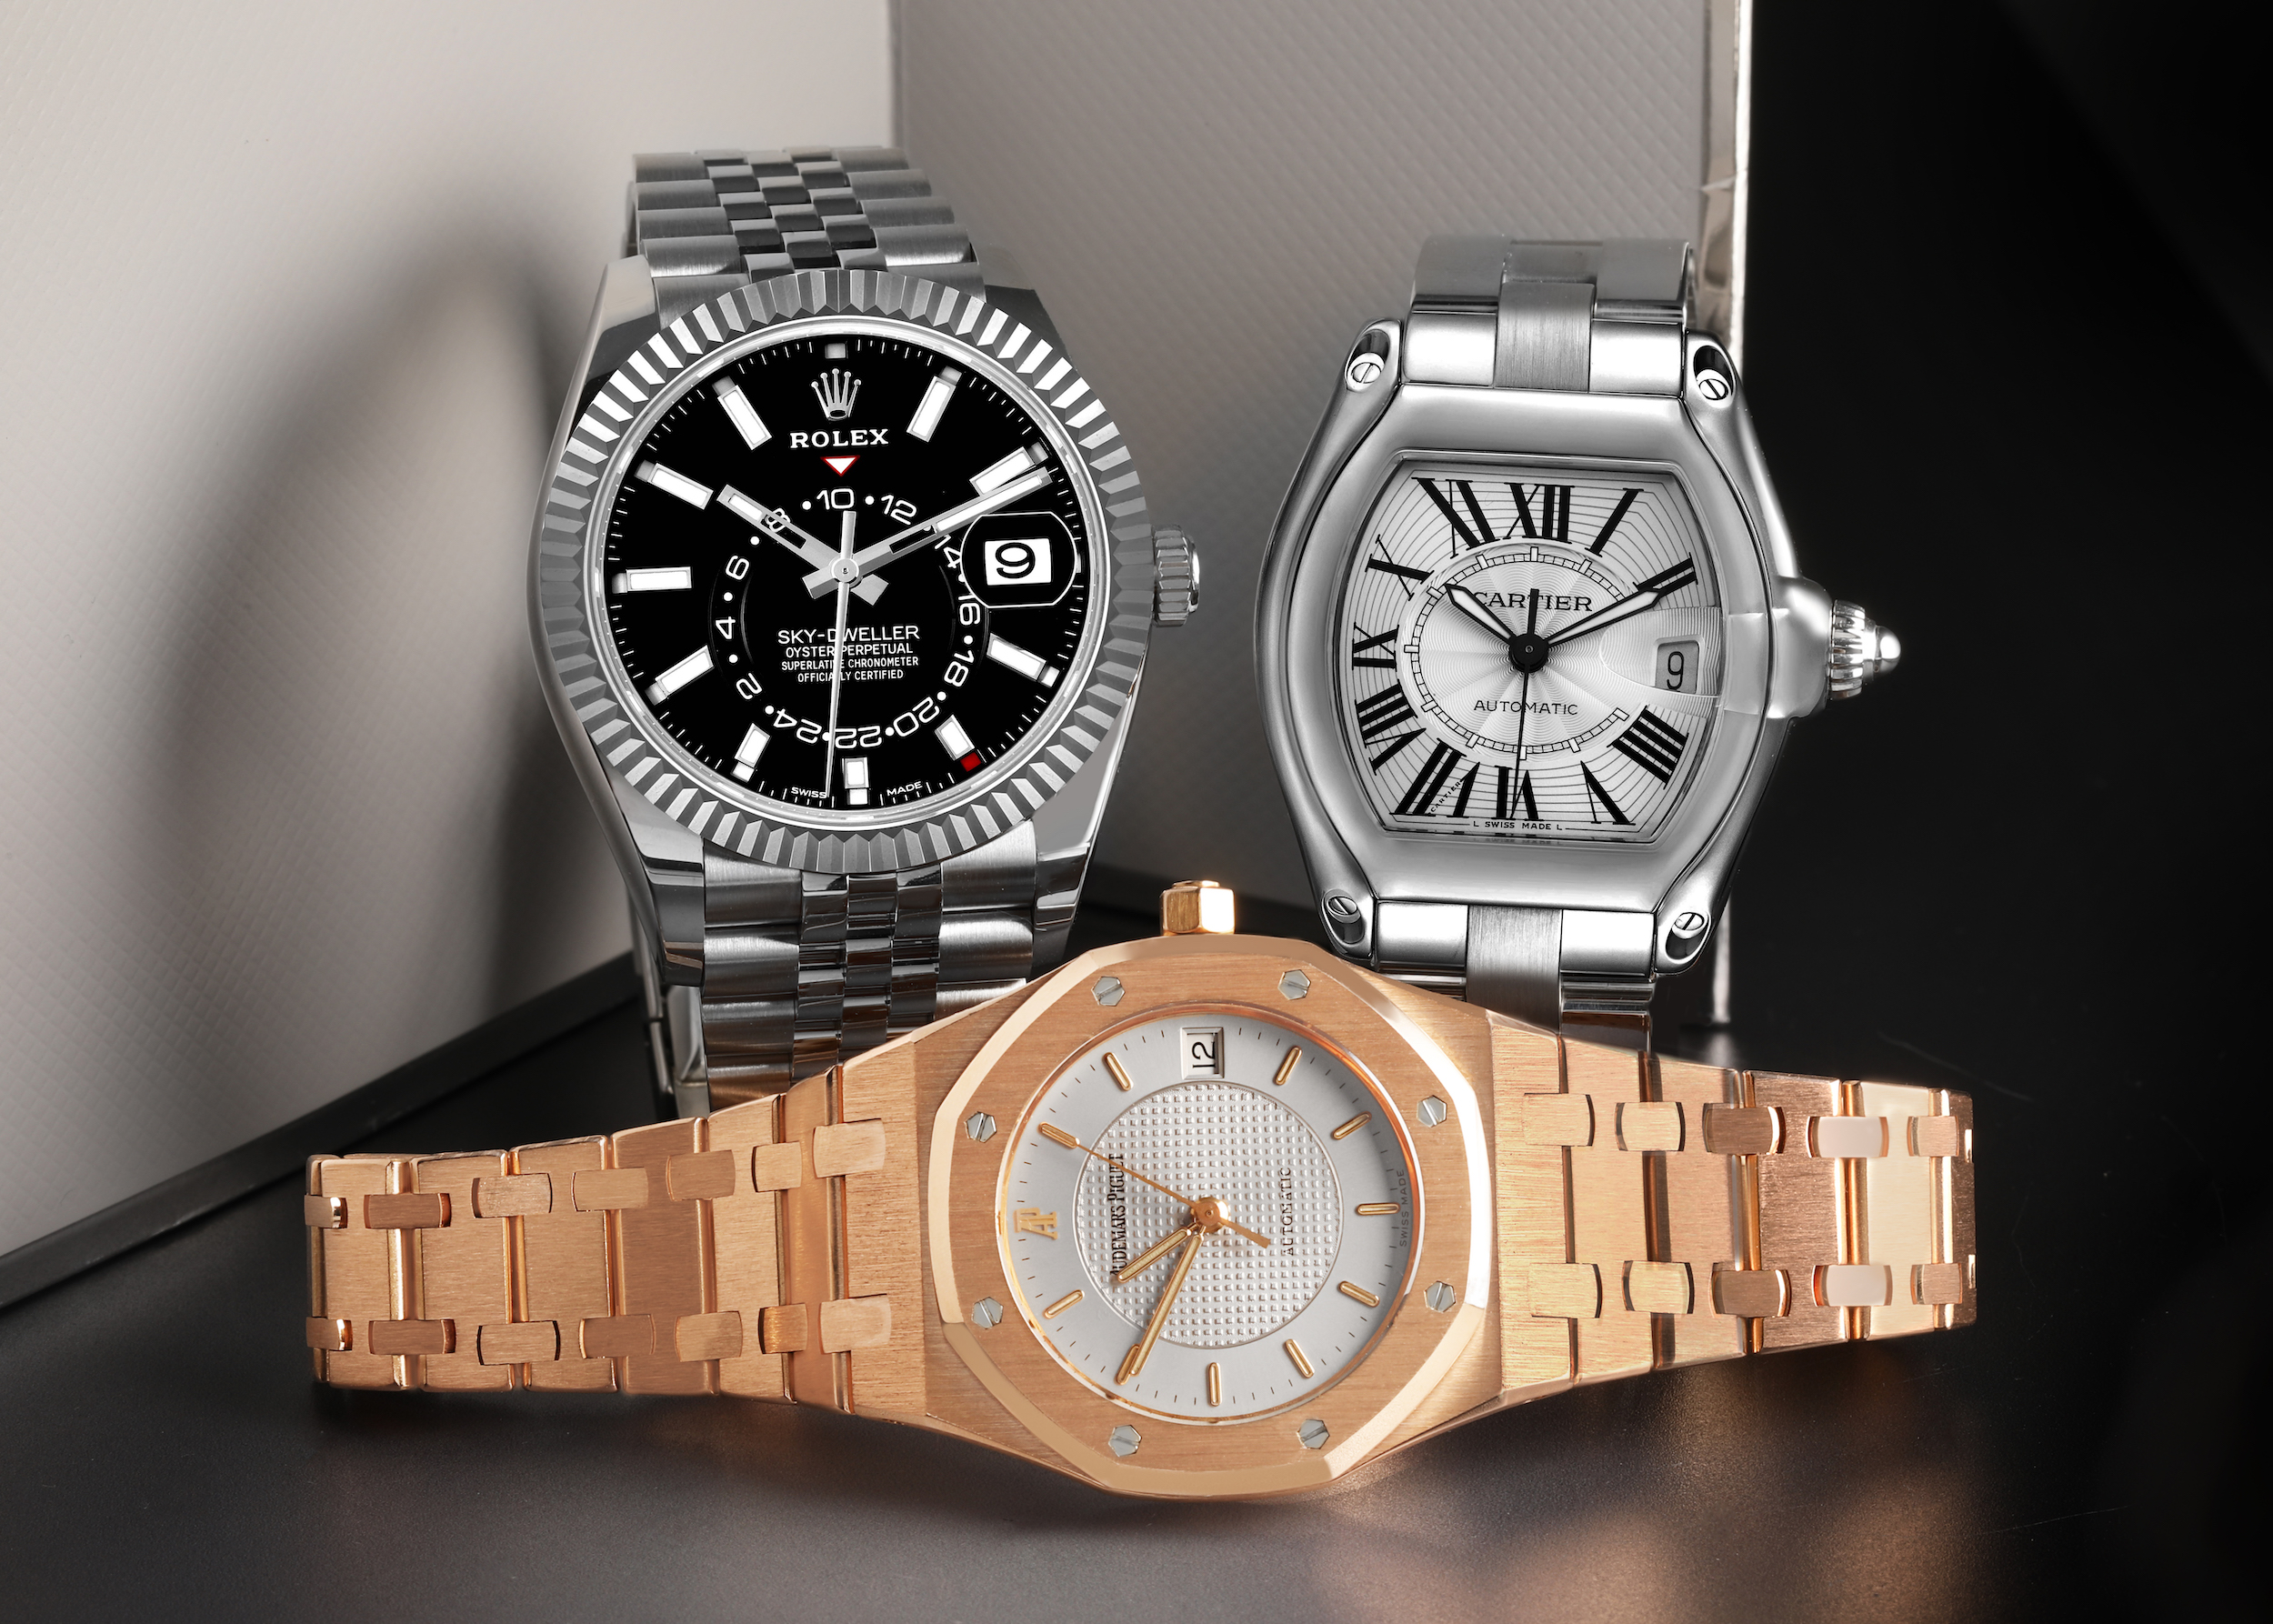 His and Hers Luxury Watches  The Watch Club by SwissWatchExpo